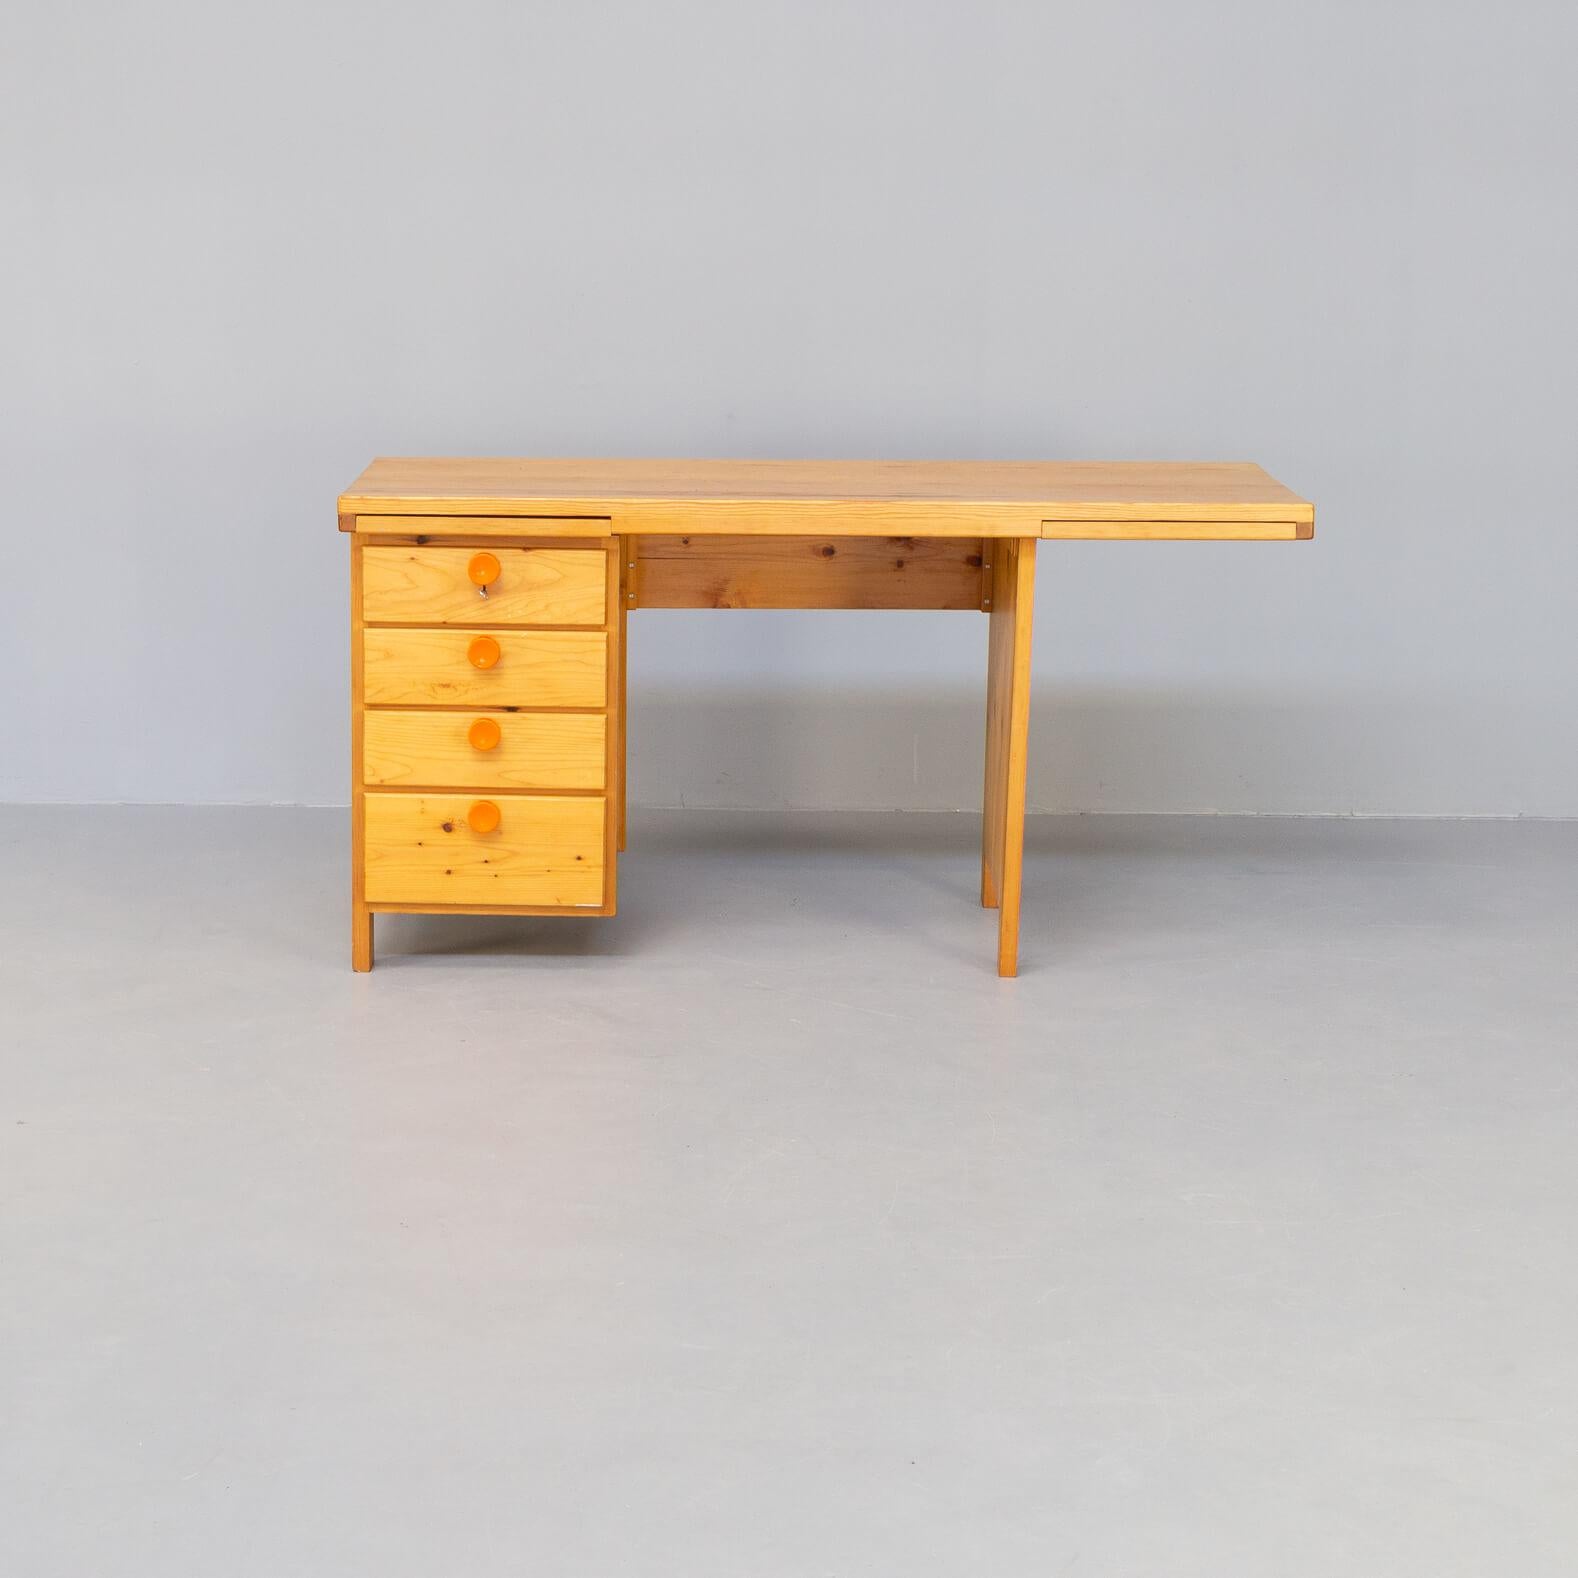 Rare and beautiful pine ladys desk with 4 drawers in typical 1970s orange style. The table top has two 'hiddend' tabletops that are to extend from the table top. Rare and very nice timeless object.